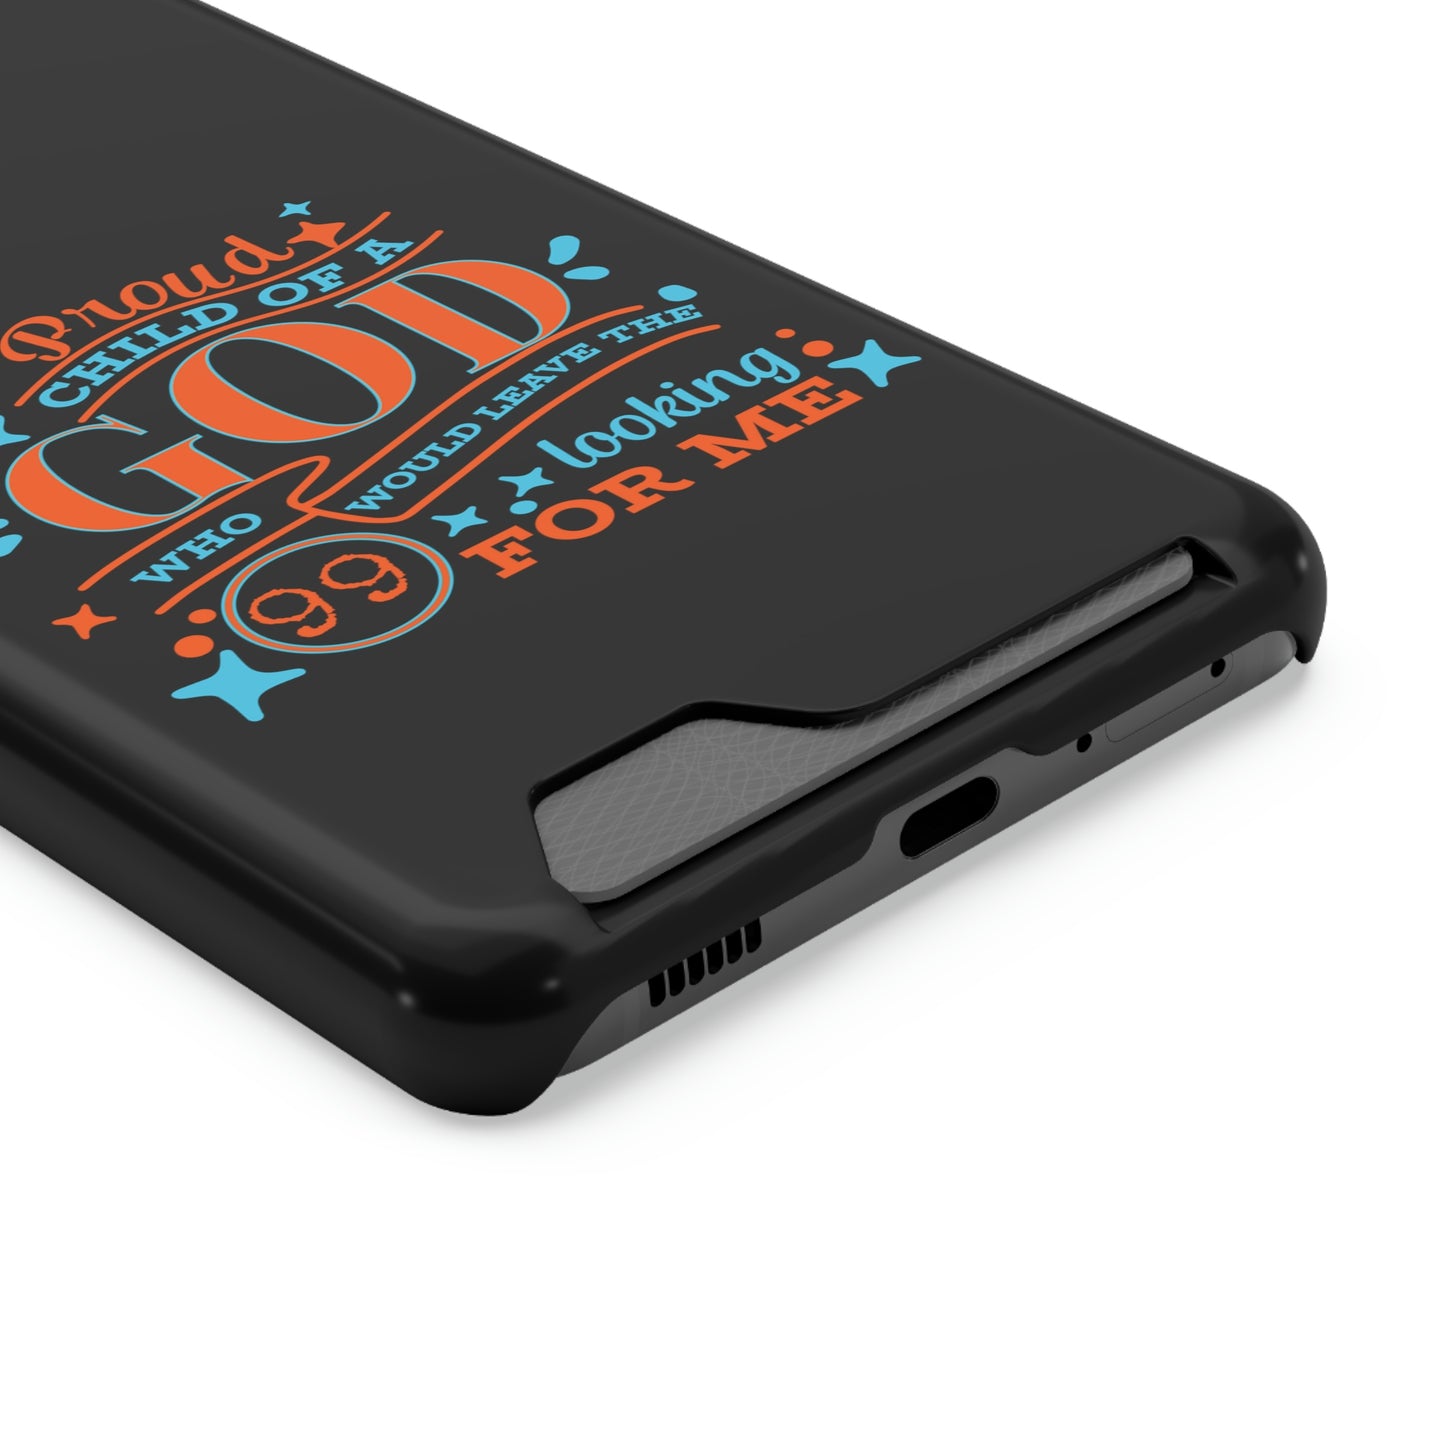 Proud Child Of A God Who Would Leave The 99 Looking for Me Phone Case With Card Holder